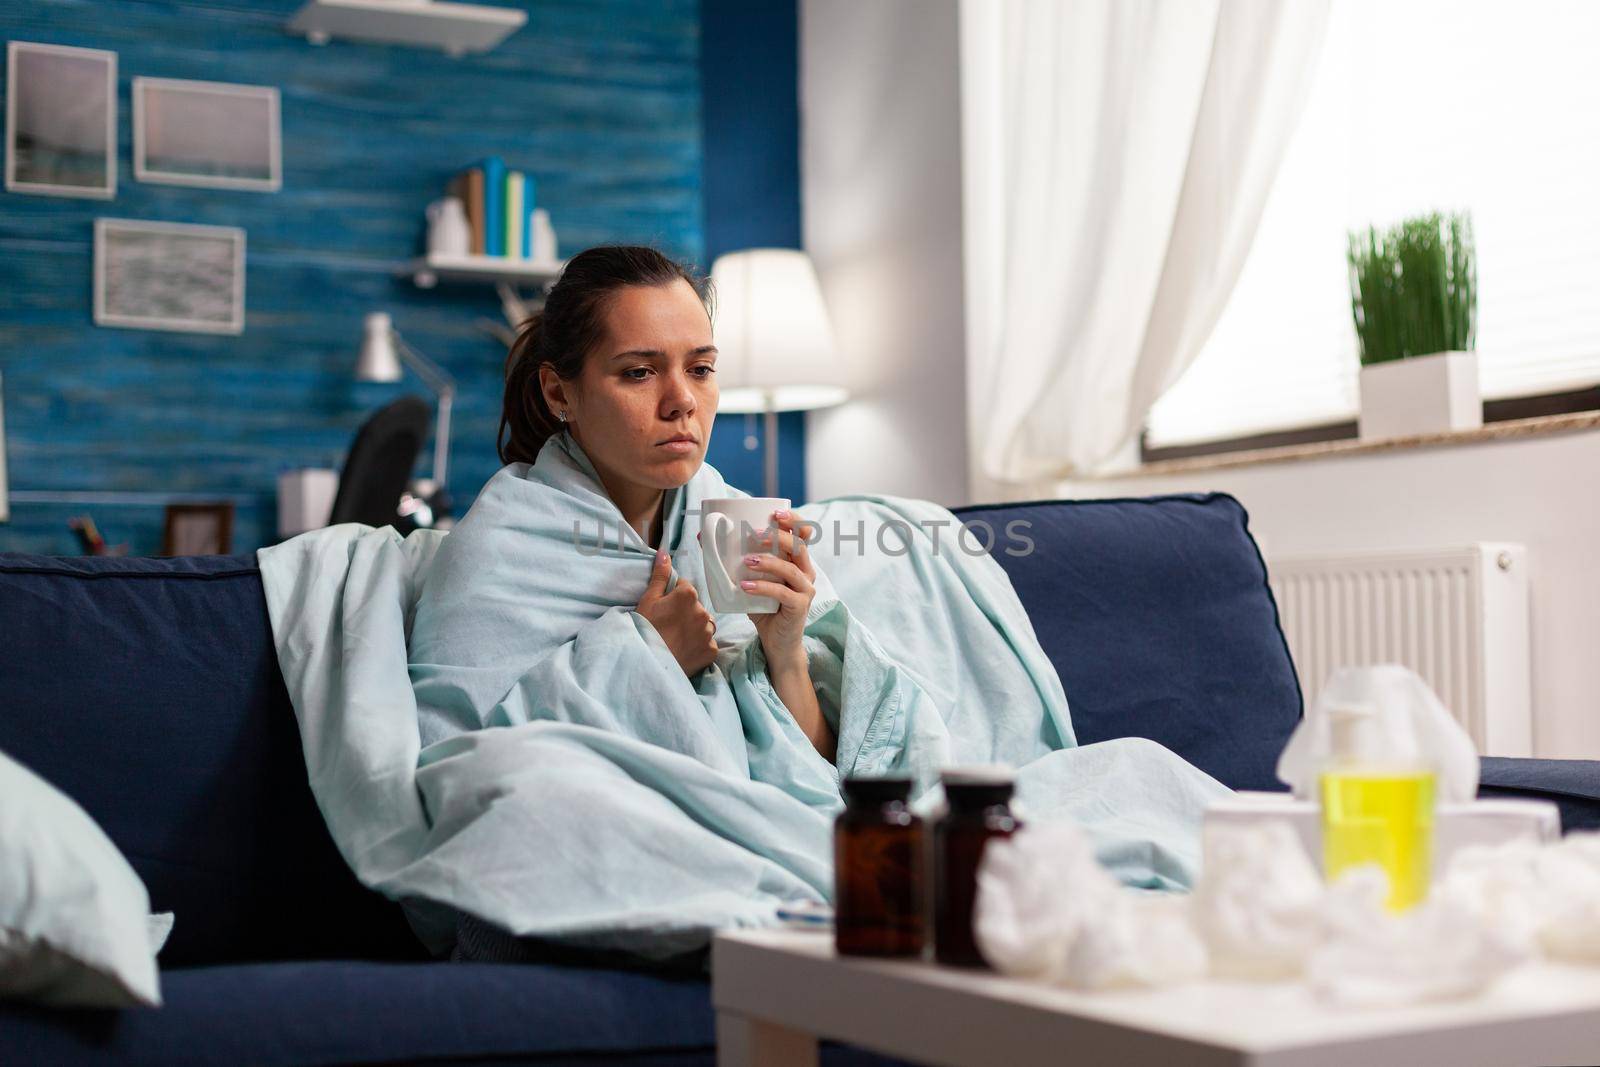 Person with sickness disease at home taking treatment for cold and flu sitting on sofa. Seasonal symptoms and cough, holding mug with tea or medicine disease treatment. Throat unwell healthcare